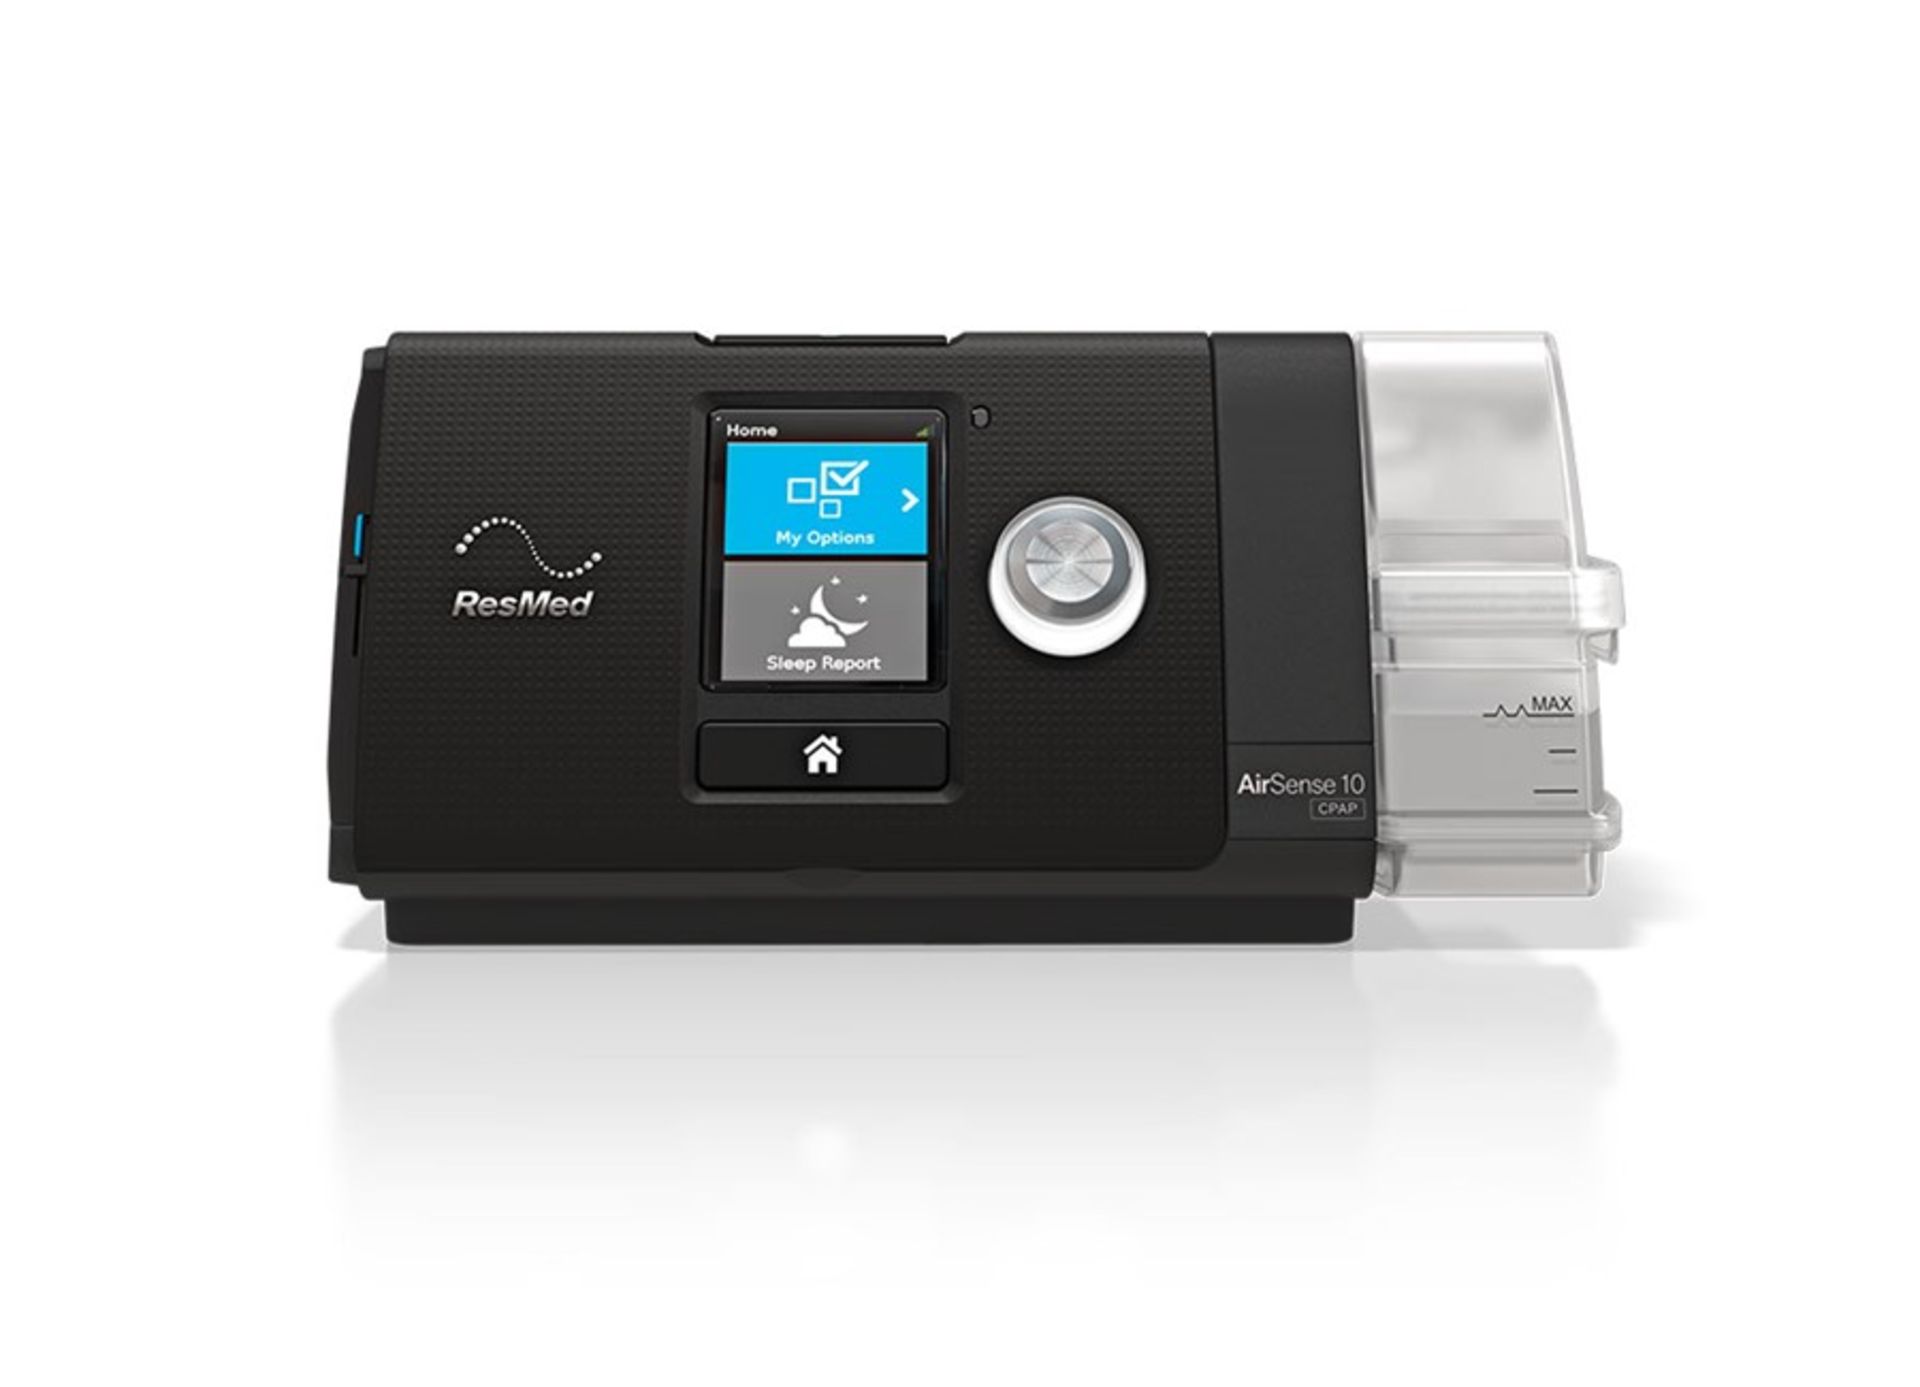 1 RESMED AIRSENSE 10 AUTOSET CPAP MACHINE FOR SLEEP APNEA, COMES WITH MAINS POWER LEAD, MASK AND